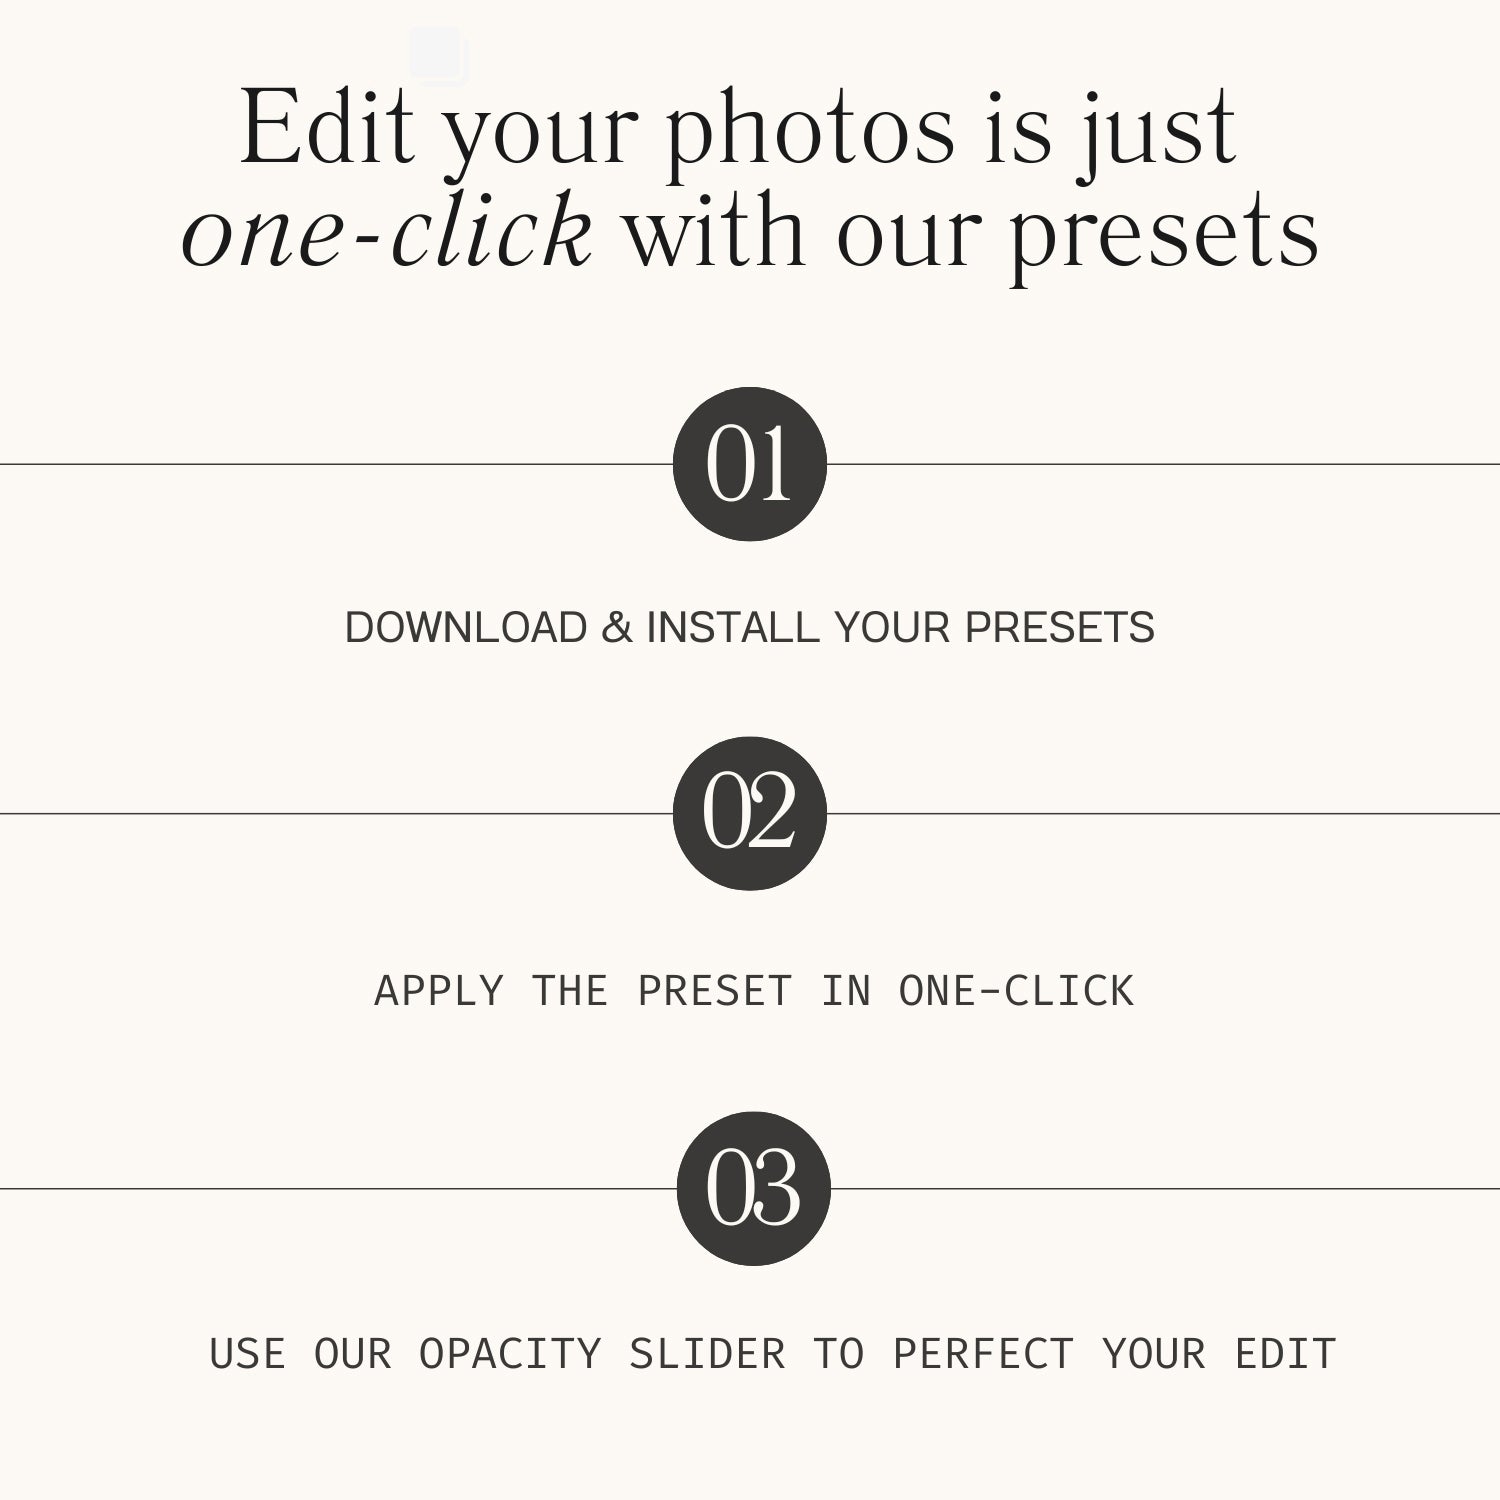 One Click Food Photography Lightroom Presets The Best Photo Editing Preset Filters For Lightroom Mobile And Desktop For Photographers and Instagram Influencers By Lou And Marks Presets